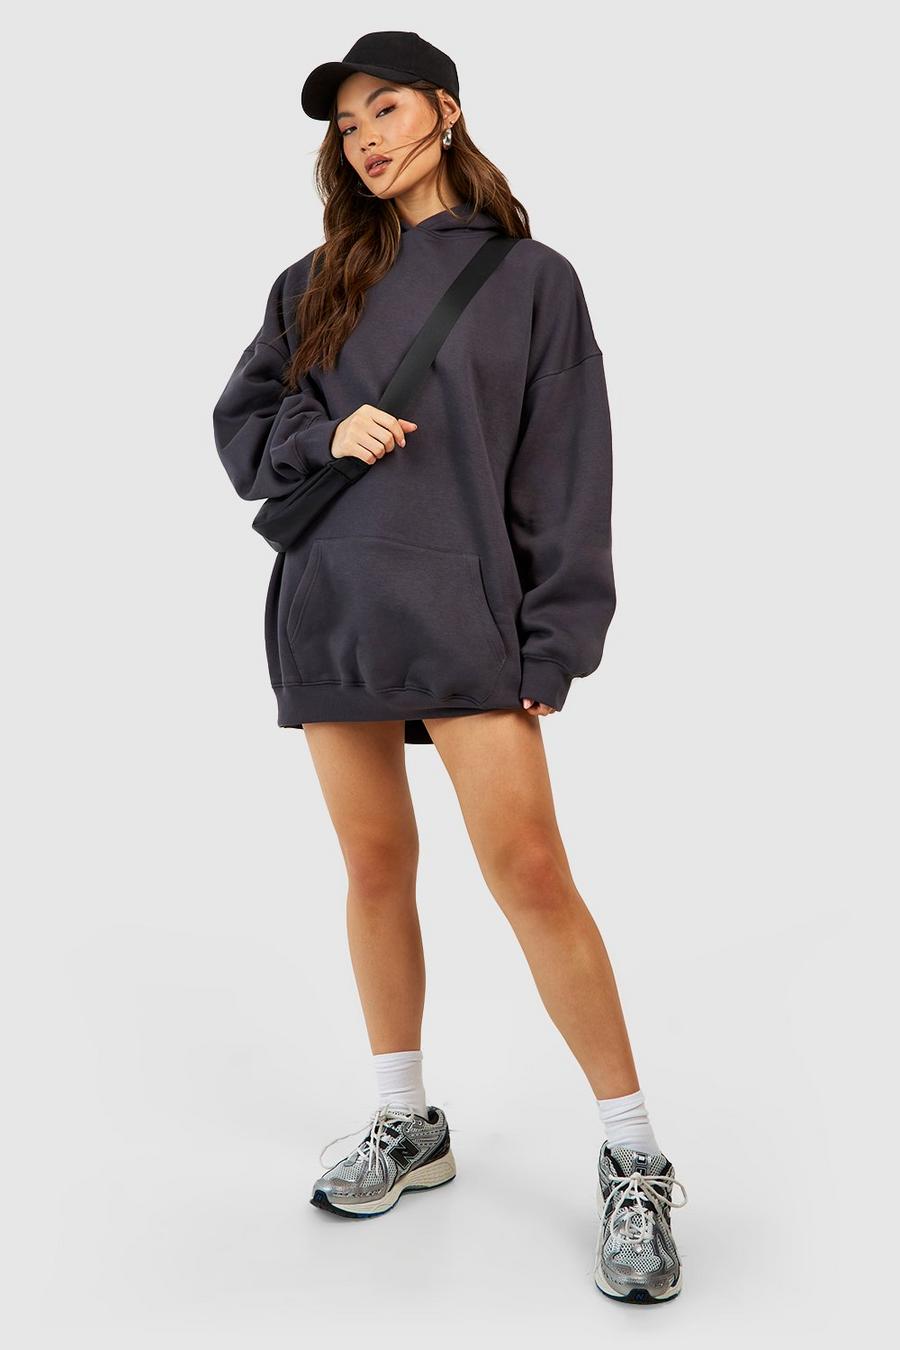 Charcoal gris Super Oversized Hooded Sweat Dress